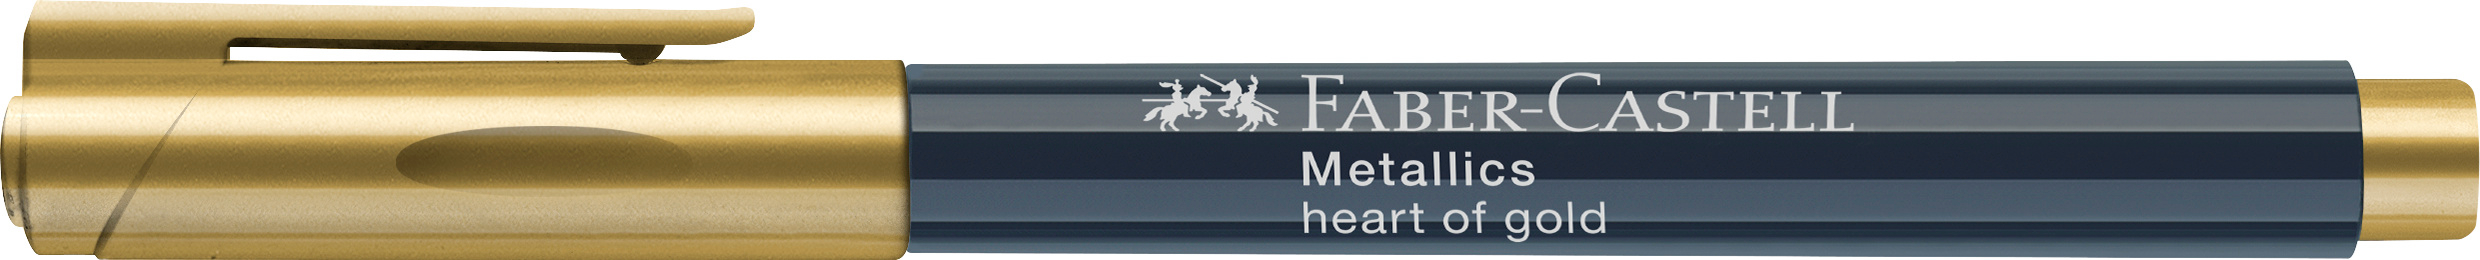 FABER-CASTELL Metallic Marker 1.5mm 160750 or or